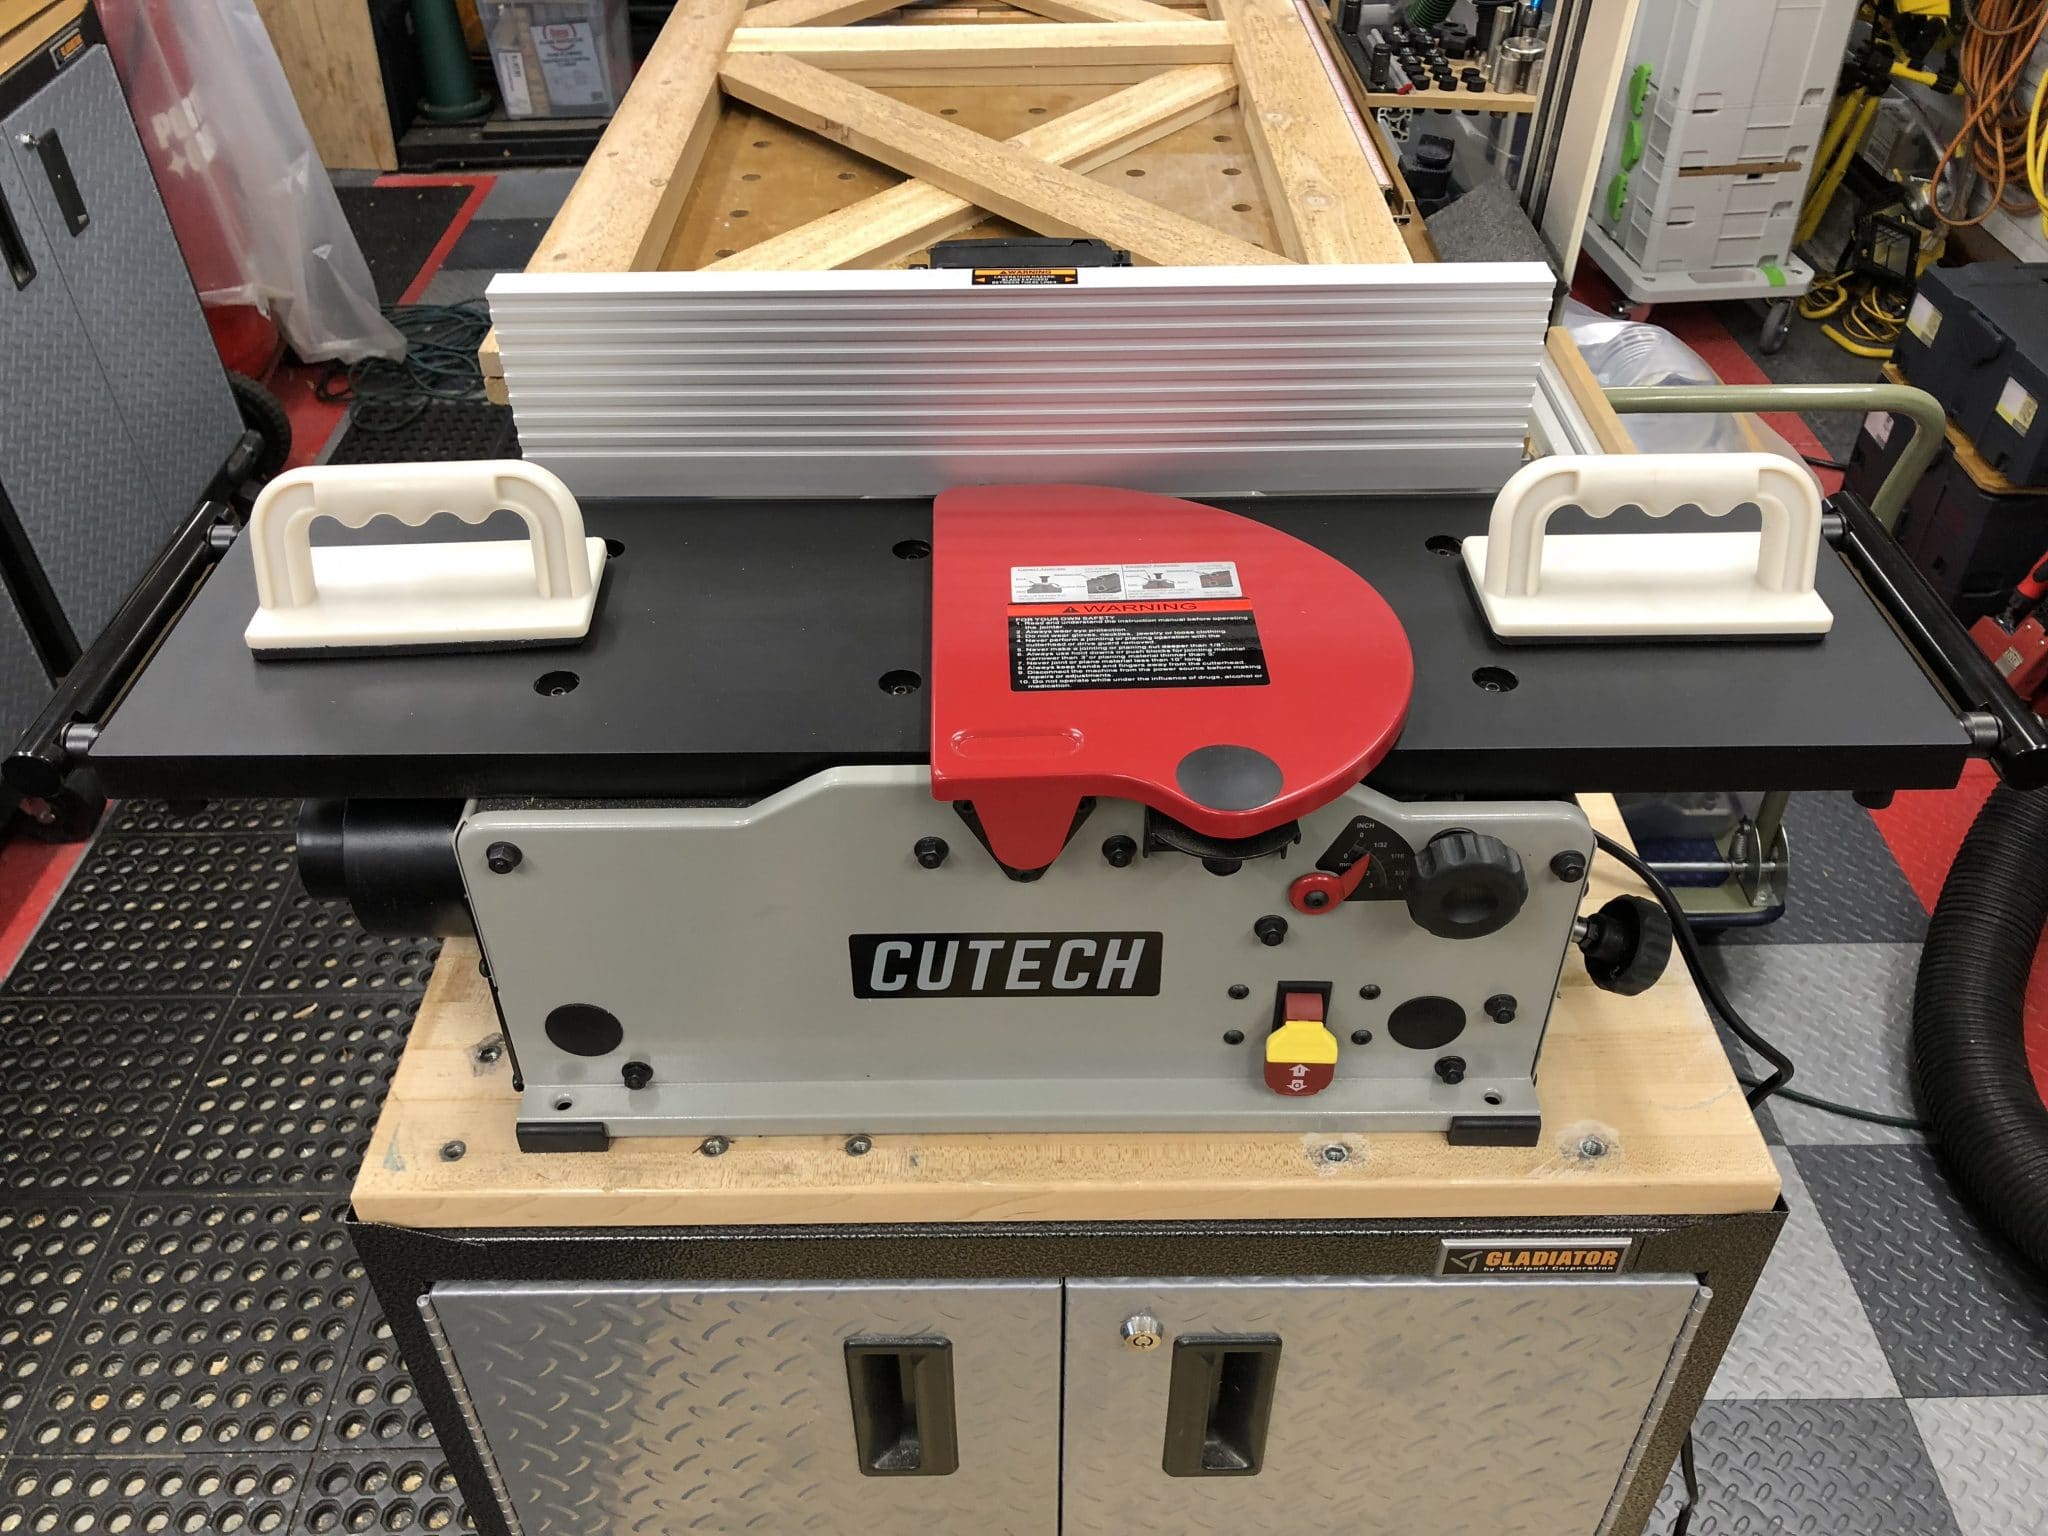 Cutech 40180H CT 8 Bench Top Spiral Cutterhead Jointer scaled - Jointer Vs. Planer: What's best for your woodworking project? - HandyMan.Guide - Jointer Vs. Planer